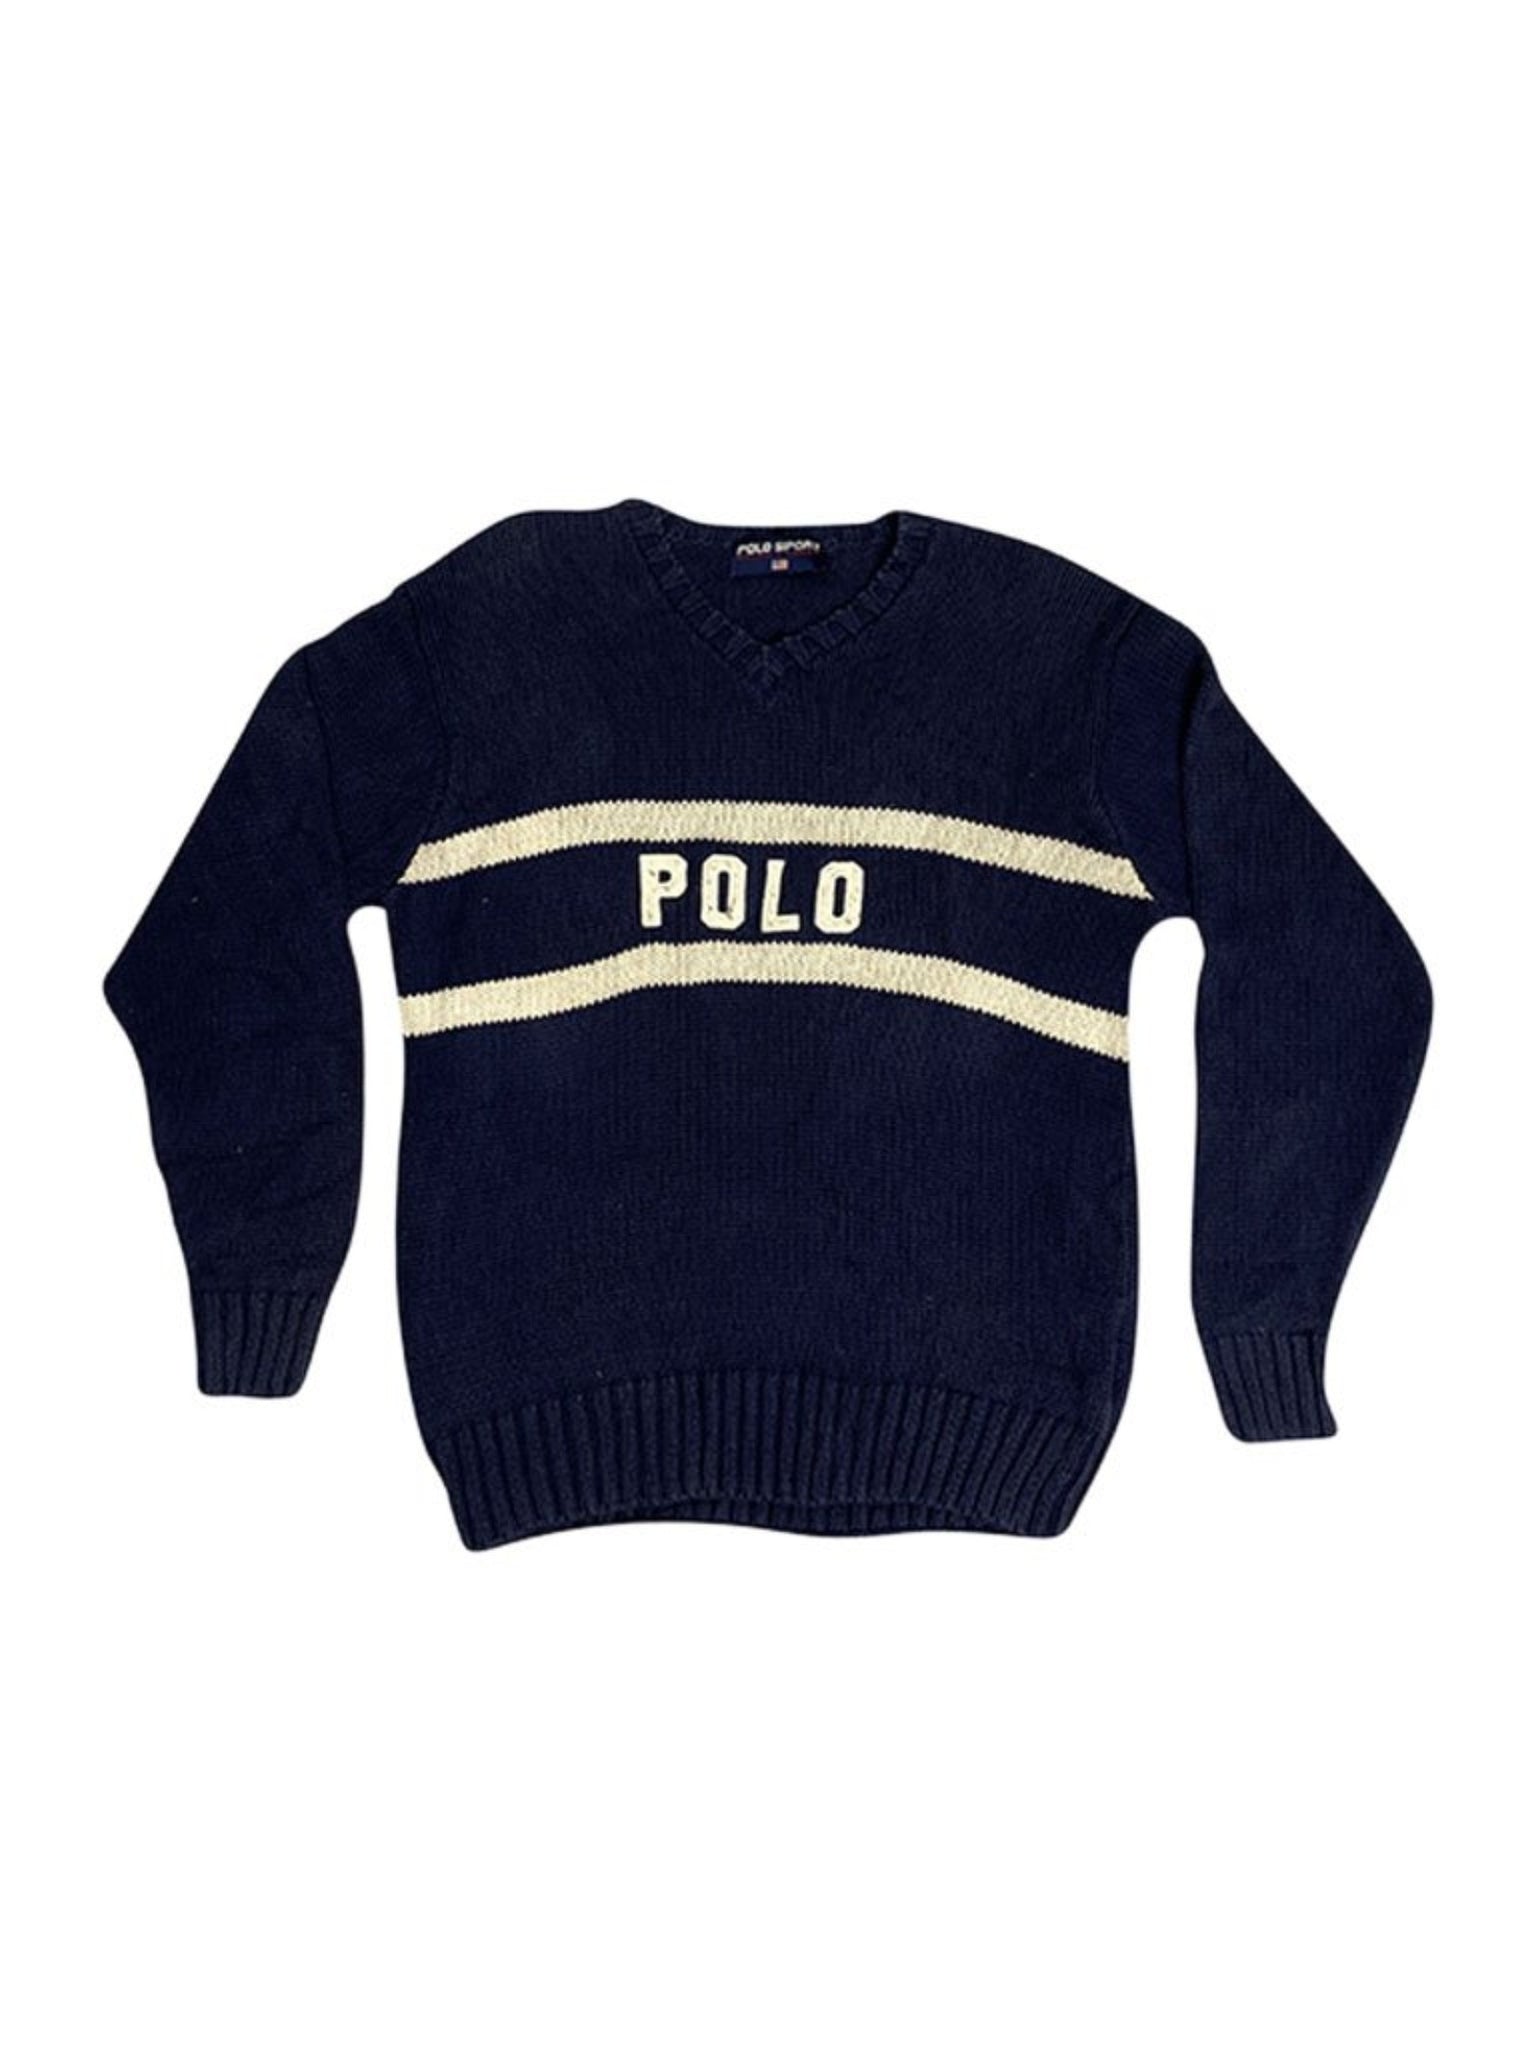 Vintage Men's Clothing Online - Shop Sweaters From Ralph Lauren And Tommy American Recycled Wholesale